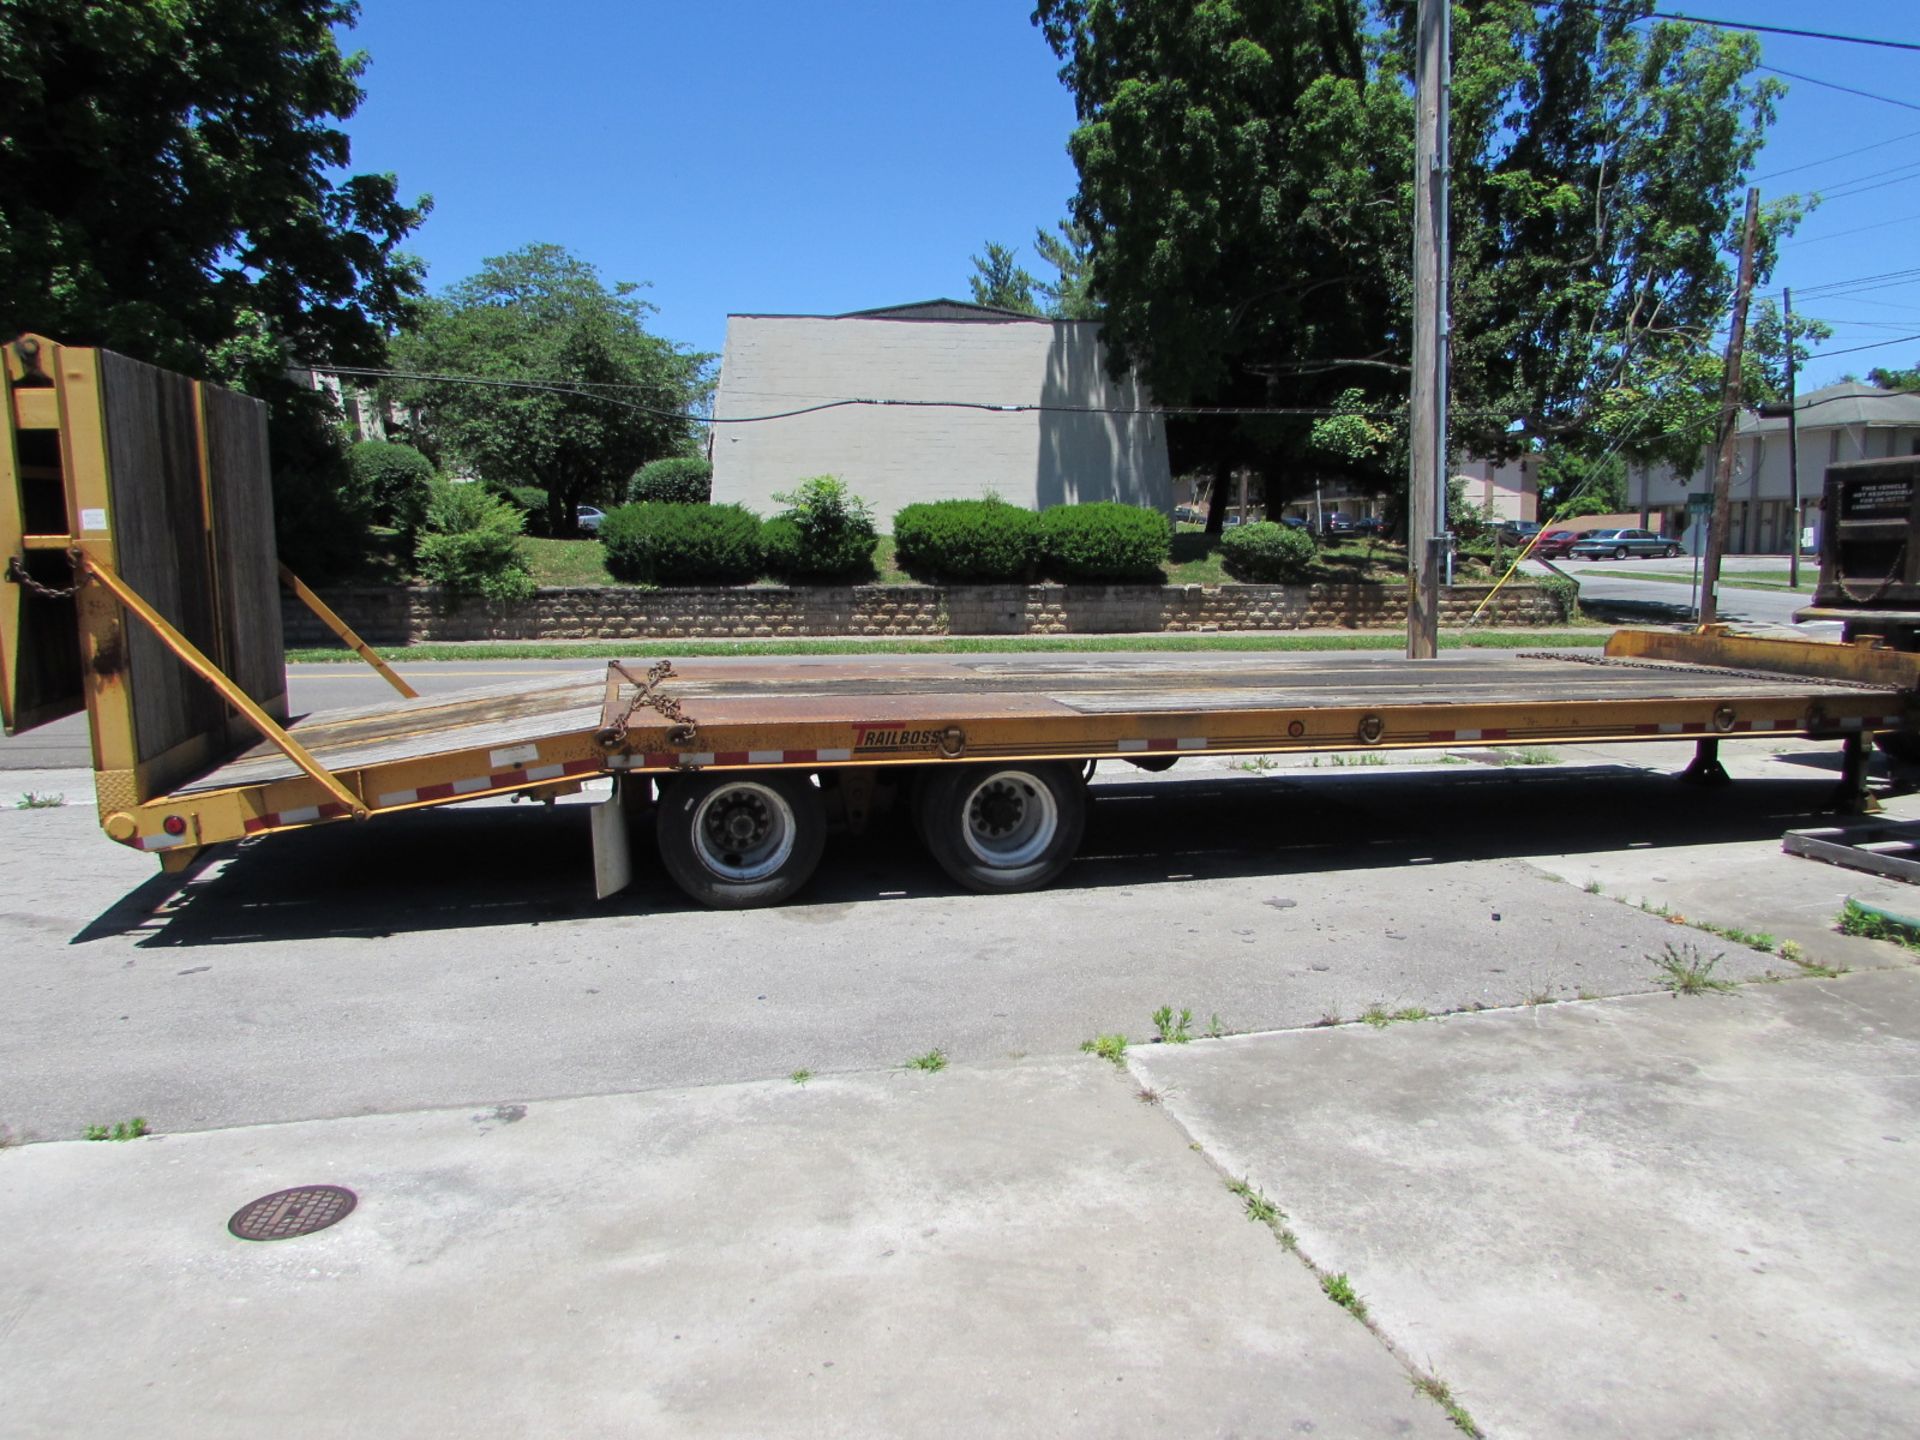 2002 Trail Boss 20-Ton Paver Trailer, Electric Brakes, Hydraulic Ramps, S/N 4S0DP302921000735 - Image 3 of 4